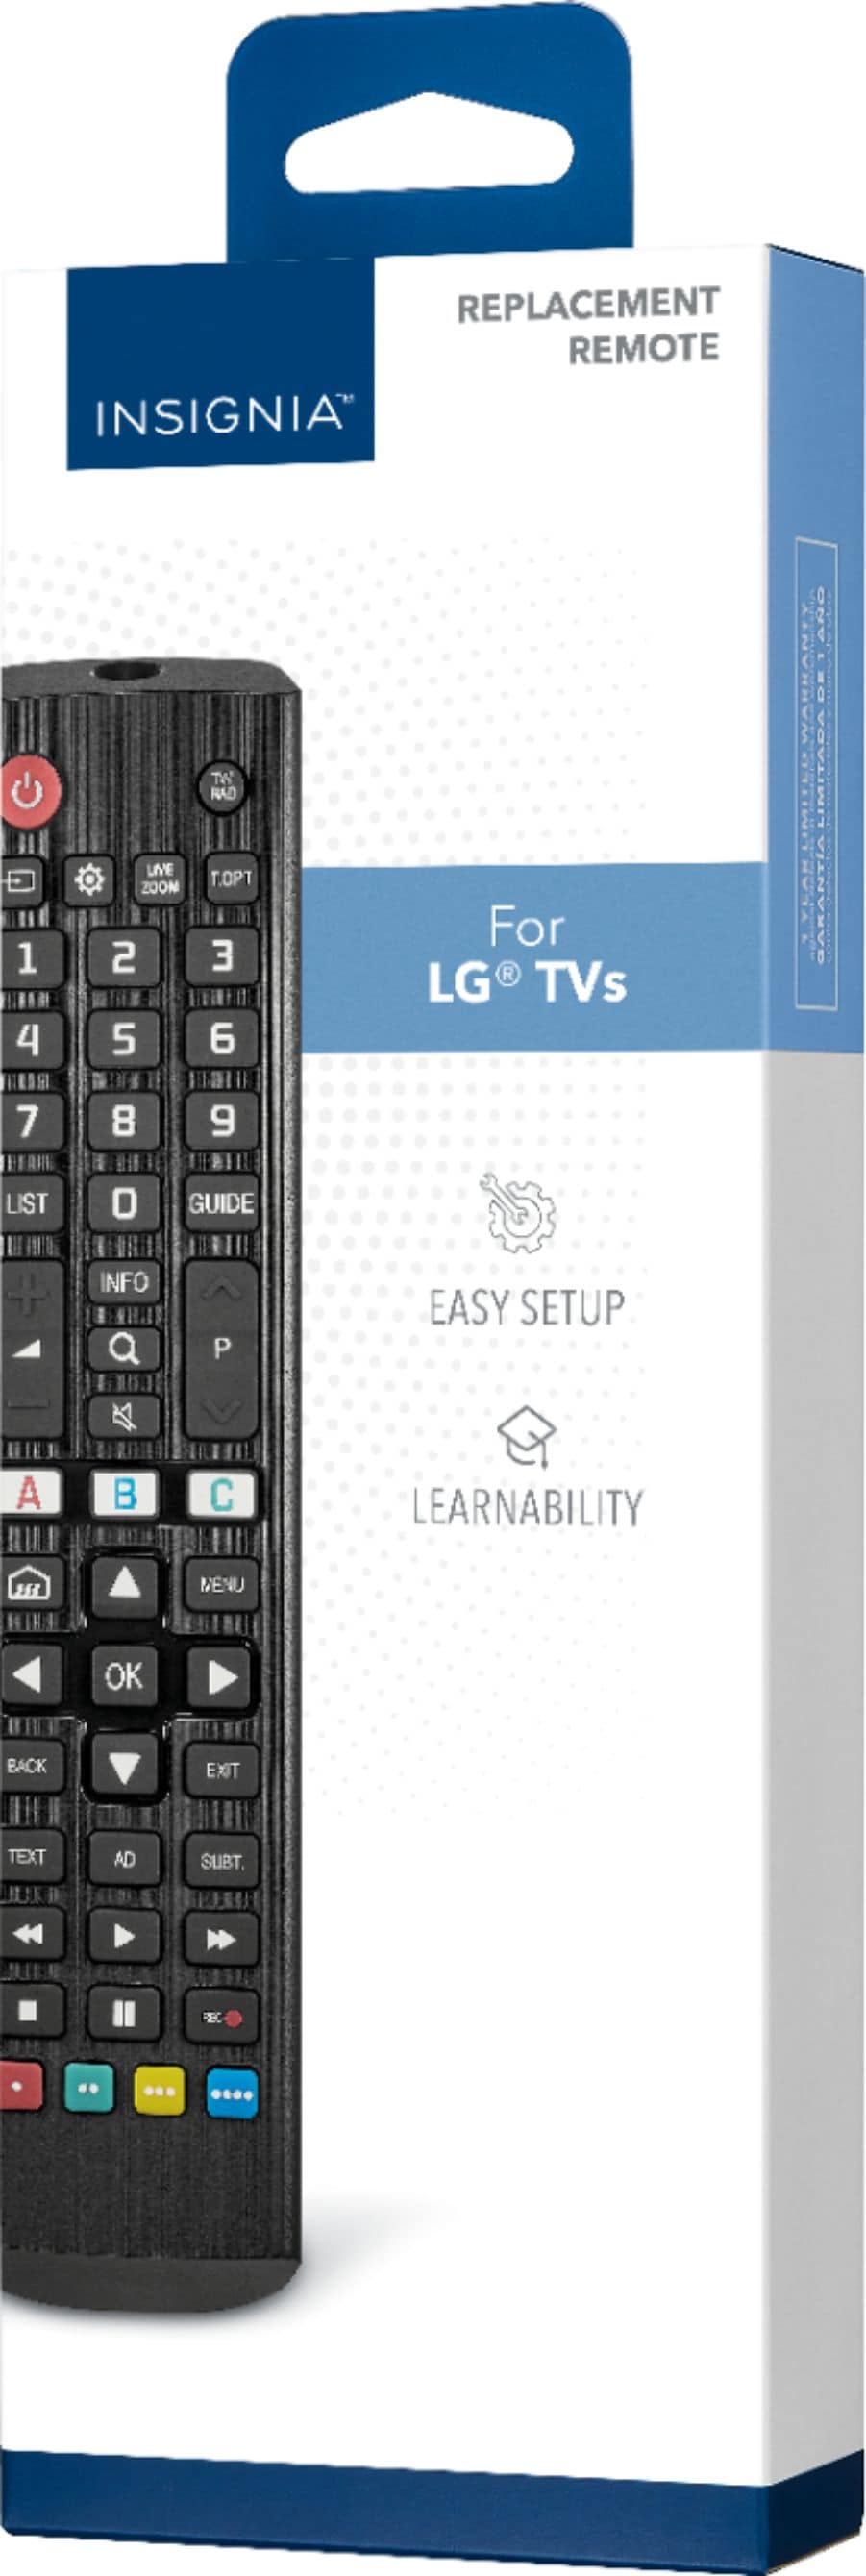 Insignia™ - Replacement Remote for LG TVs - Black_1